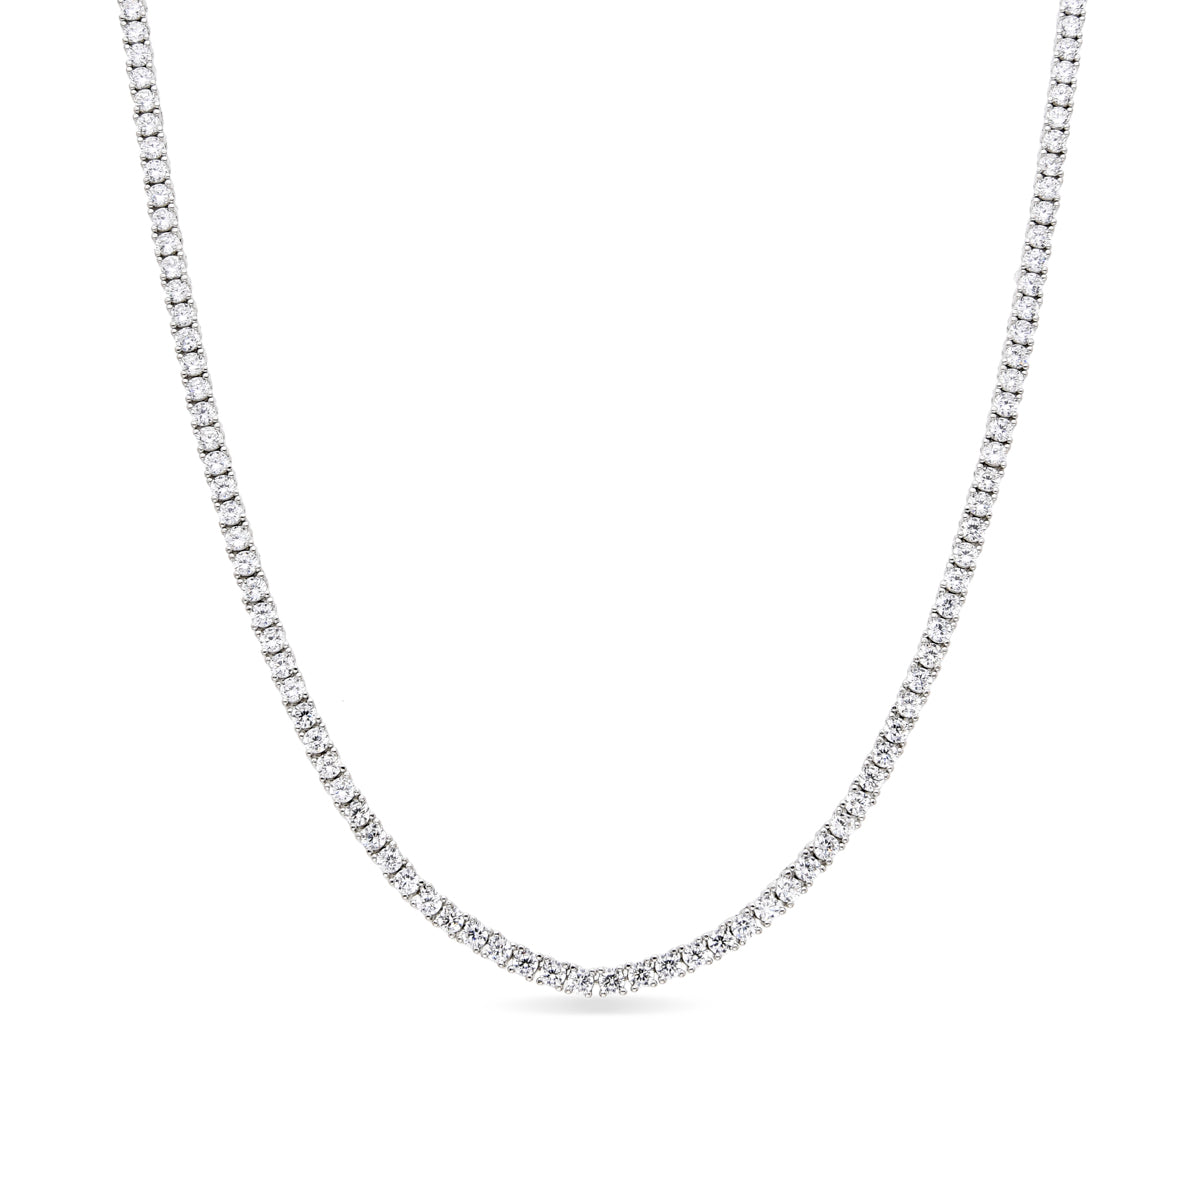 Tahu 925 Sterling Silver Necklace